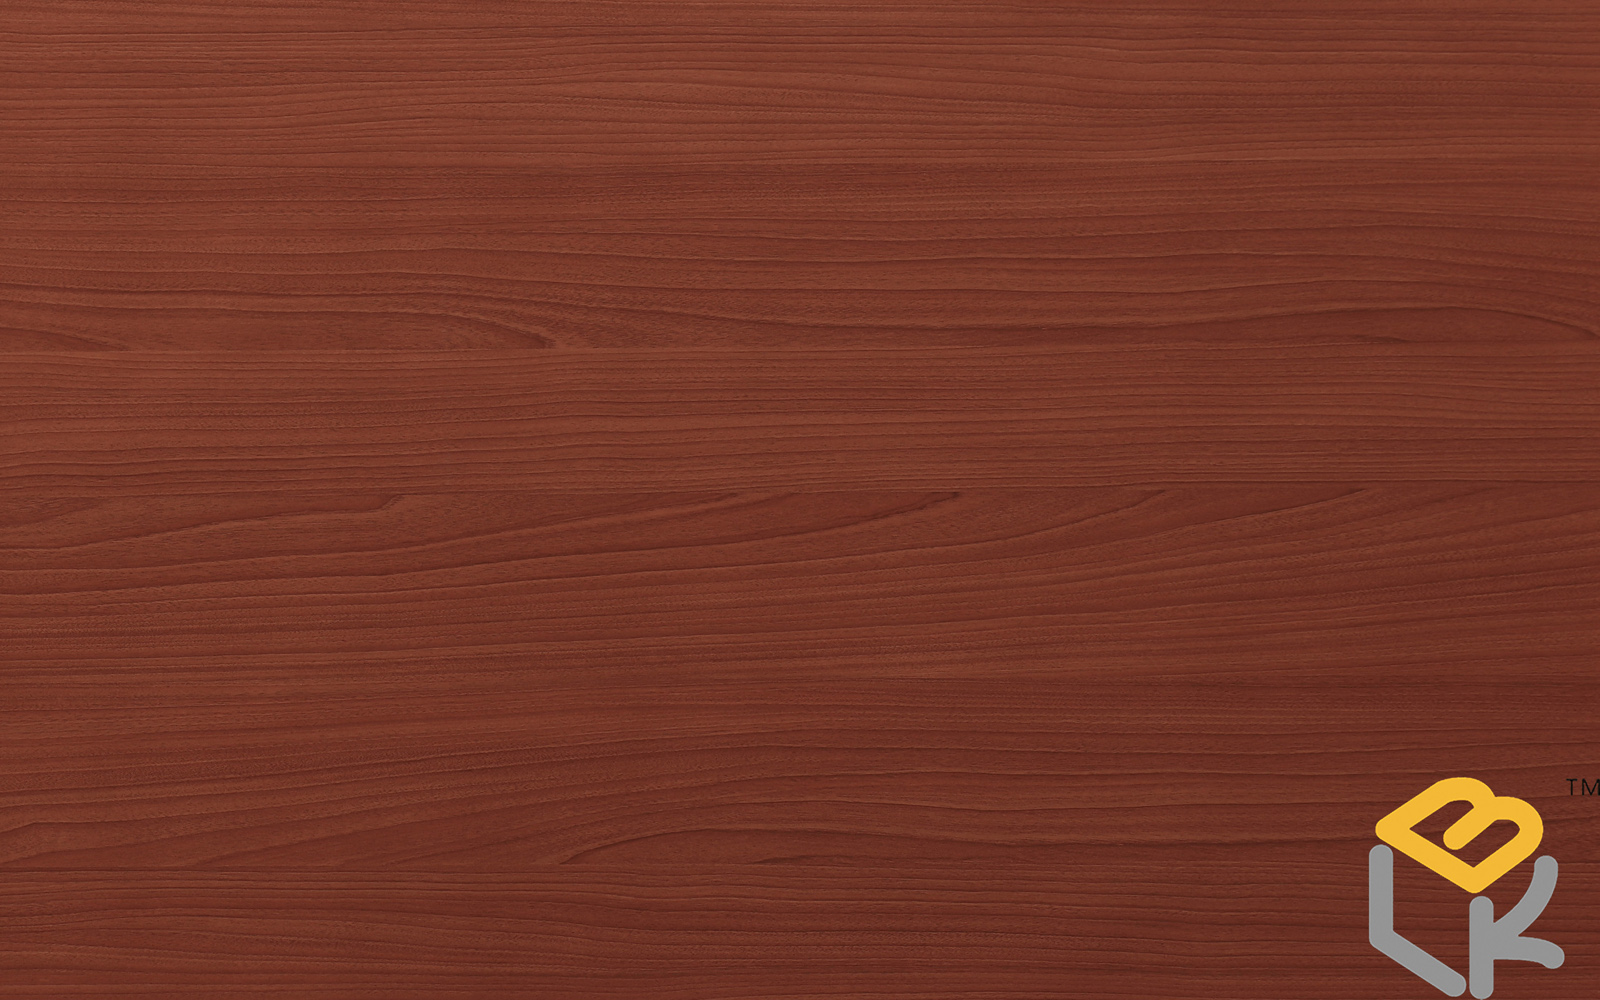 Redwood melamine faced MDF from China